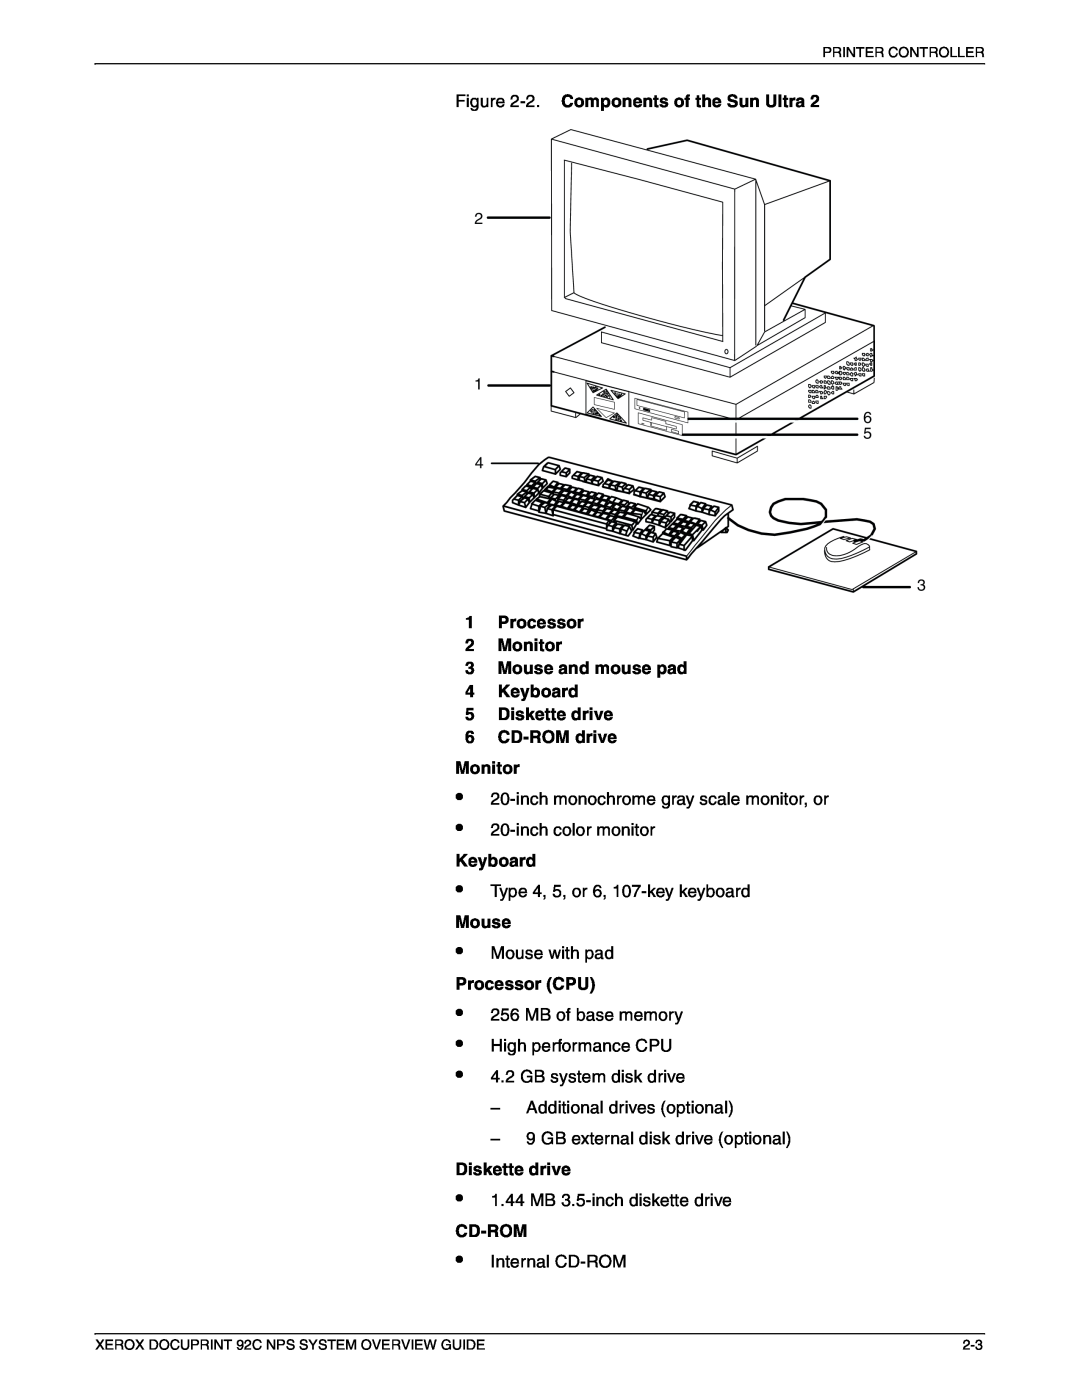 Xerox 92C NPS 2. Components of the Sun Ultra, Processor 2 Monitor 3 Mouse and mouse pad 4 Keyboard, Processor CPU, Cd-Rom 